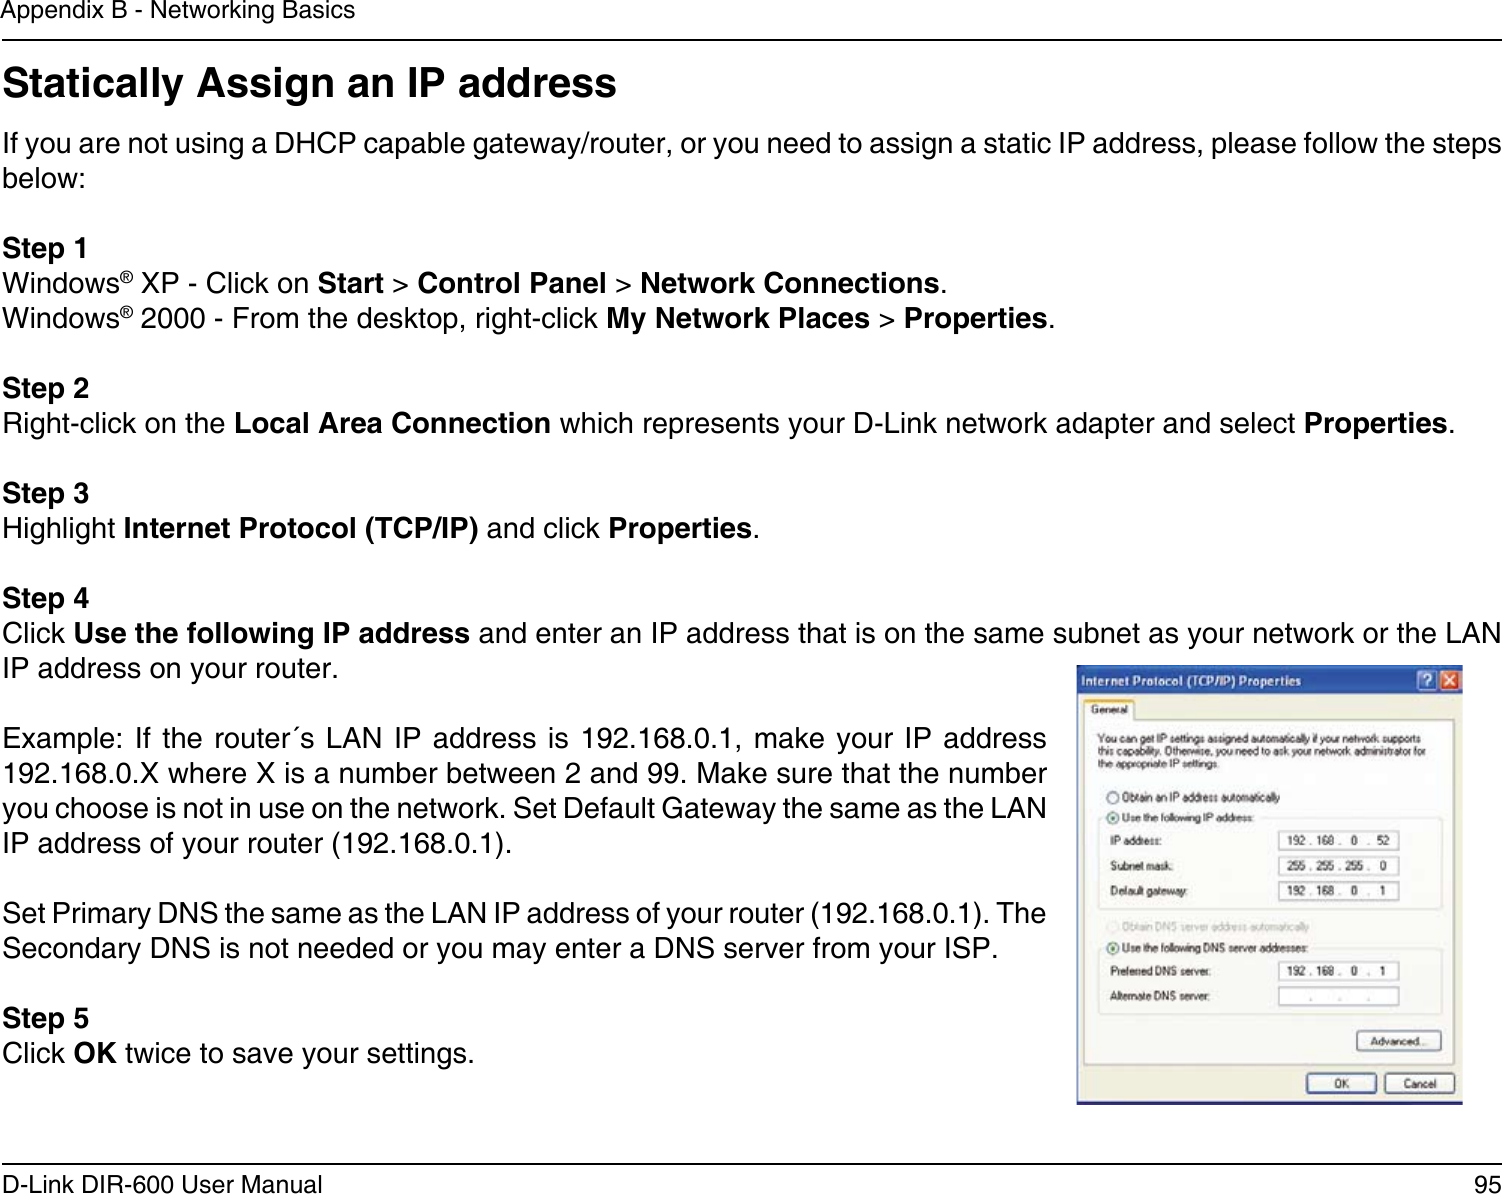 95D-Link DIR-600 User ManualAppendix B - Networking BasicsStatically Assign an IP addressIf you are not using a DHCP capable gateway/router, or you need to assign a static IP address, please follow the steps below:Step 1Windows® XP - Click on Start &gt; Control Panel &gt; Network Connections.Windows® 2000 - From the desktop, right-click My Network Places &gt; Properties.Step 2Right-click on the Local Area Connection which represents your D-Link network adapter and select Properties.Step 3Highlight Internet Protocol (TCP/IP) and click Properties.Step 4Click Use the following IP address and enter an IP address that is on the same subnet as your network or the LAN IP address on your router. Example: If  the router´s LAN IP address  is 192.168.0.1, make your IP  address 192.168.0.X where X is a number between 2 and 99. Make sure that the number you choose is not in use on the network. Set Default Gateway the same as the LAN IP address of your router (192.168.0.1). Set Primary DNS the same as the LAN IP address of your router (192.168.0.1). The Secondary DNS is not needed or you may enter a DNS server from your ISP.Step 5Click OK twice to save your settings.